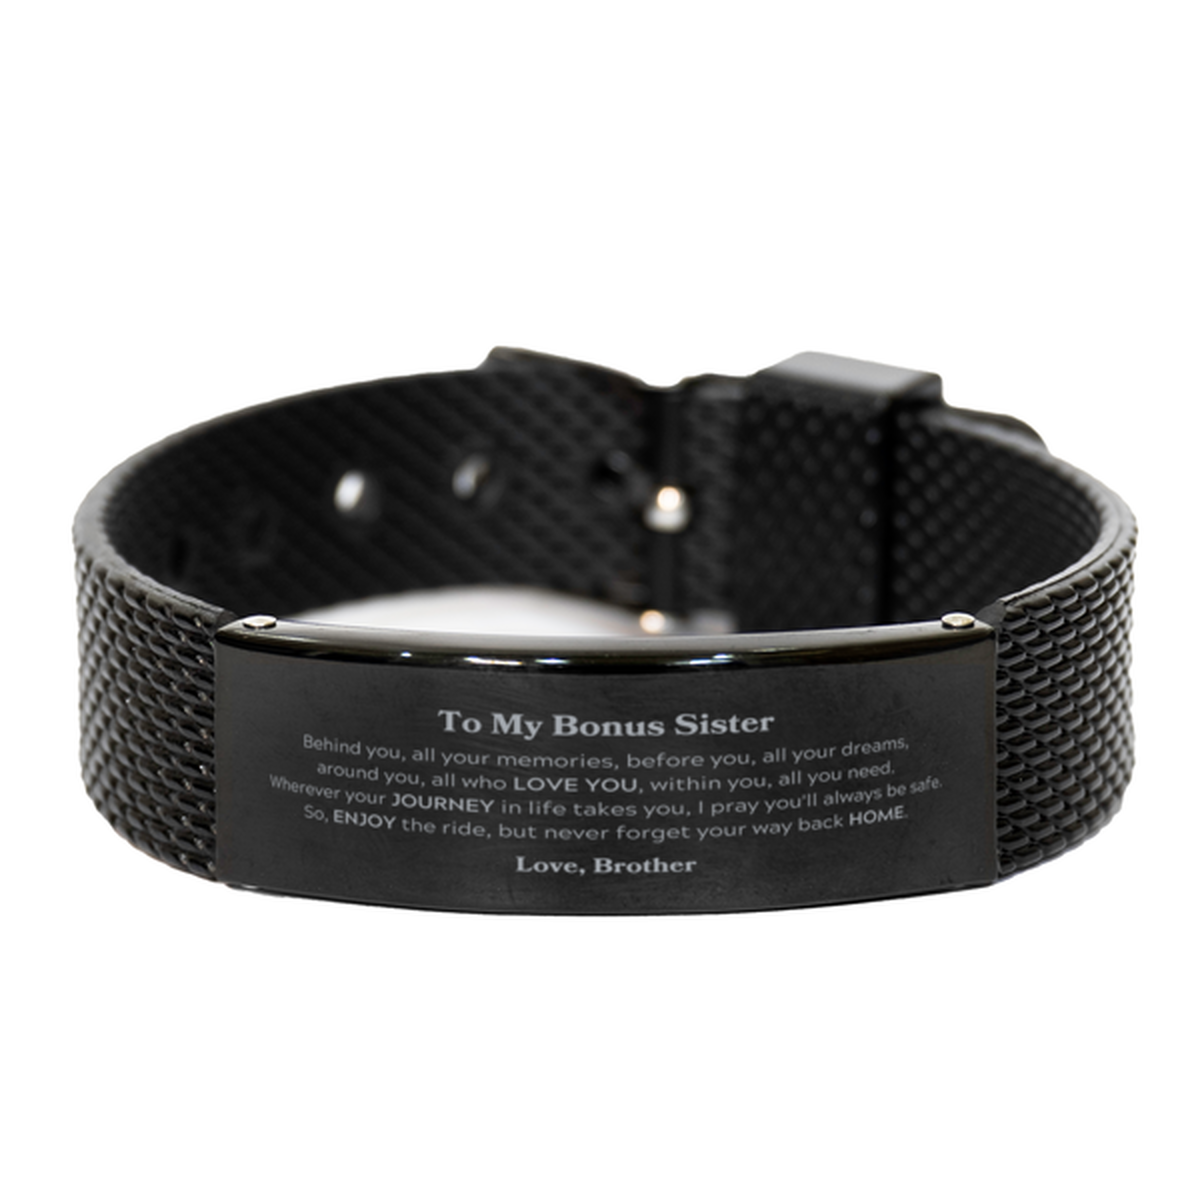 To My Bonus Sister Graduation Gifts from Brother, Bonus Sister Black Shark Mesh Bracelet Christmas Birthday Gifts for Bonus Sister Behind you, all your memories, before you, all your dreams. Love, Brother